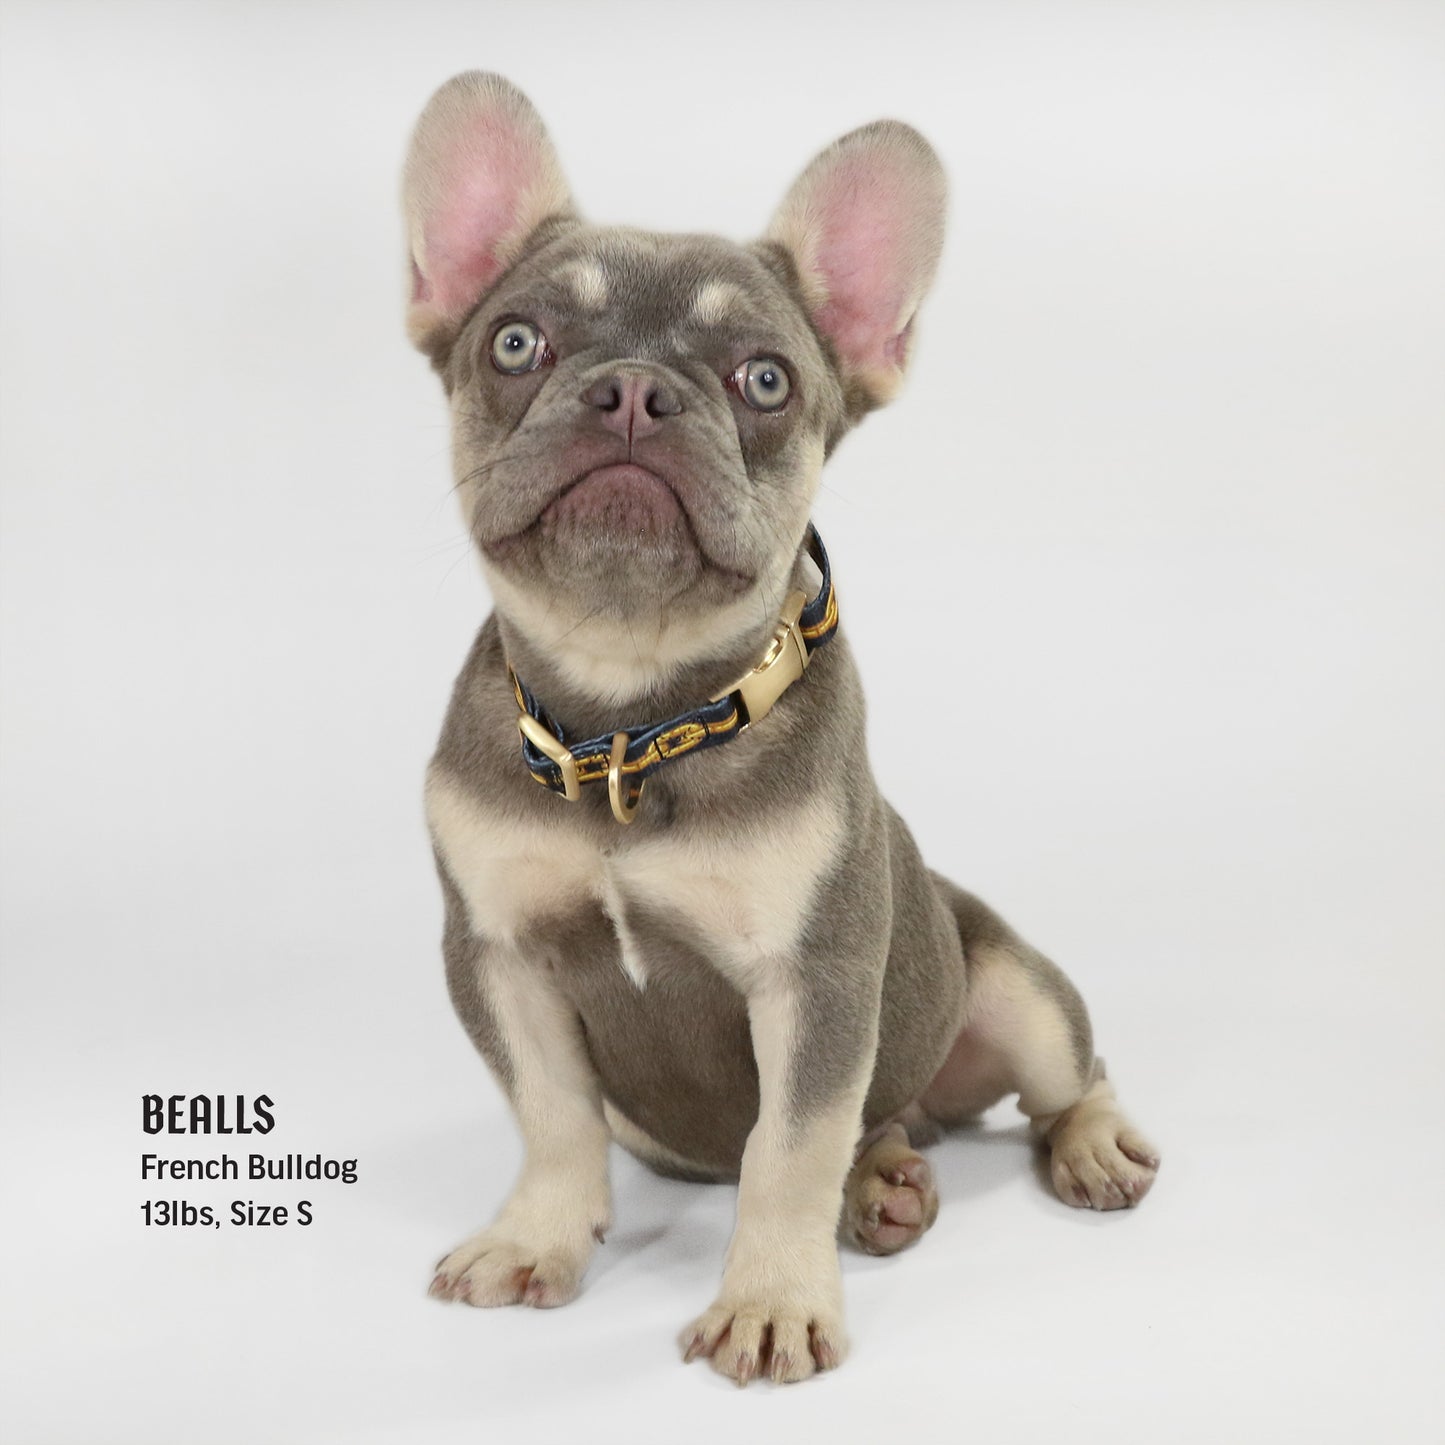 Bealls the French Bulldog wearing the Off the Chain Deluxe Pet Collar in size Small.